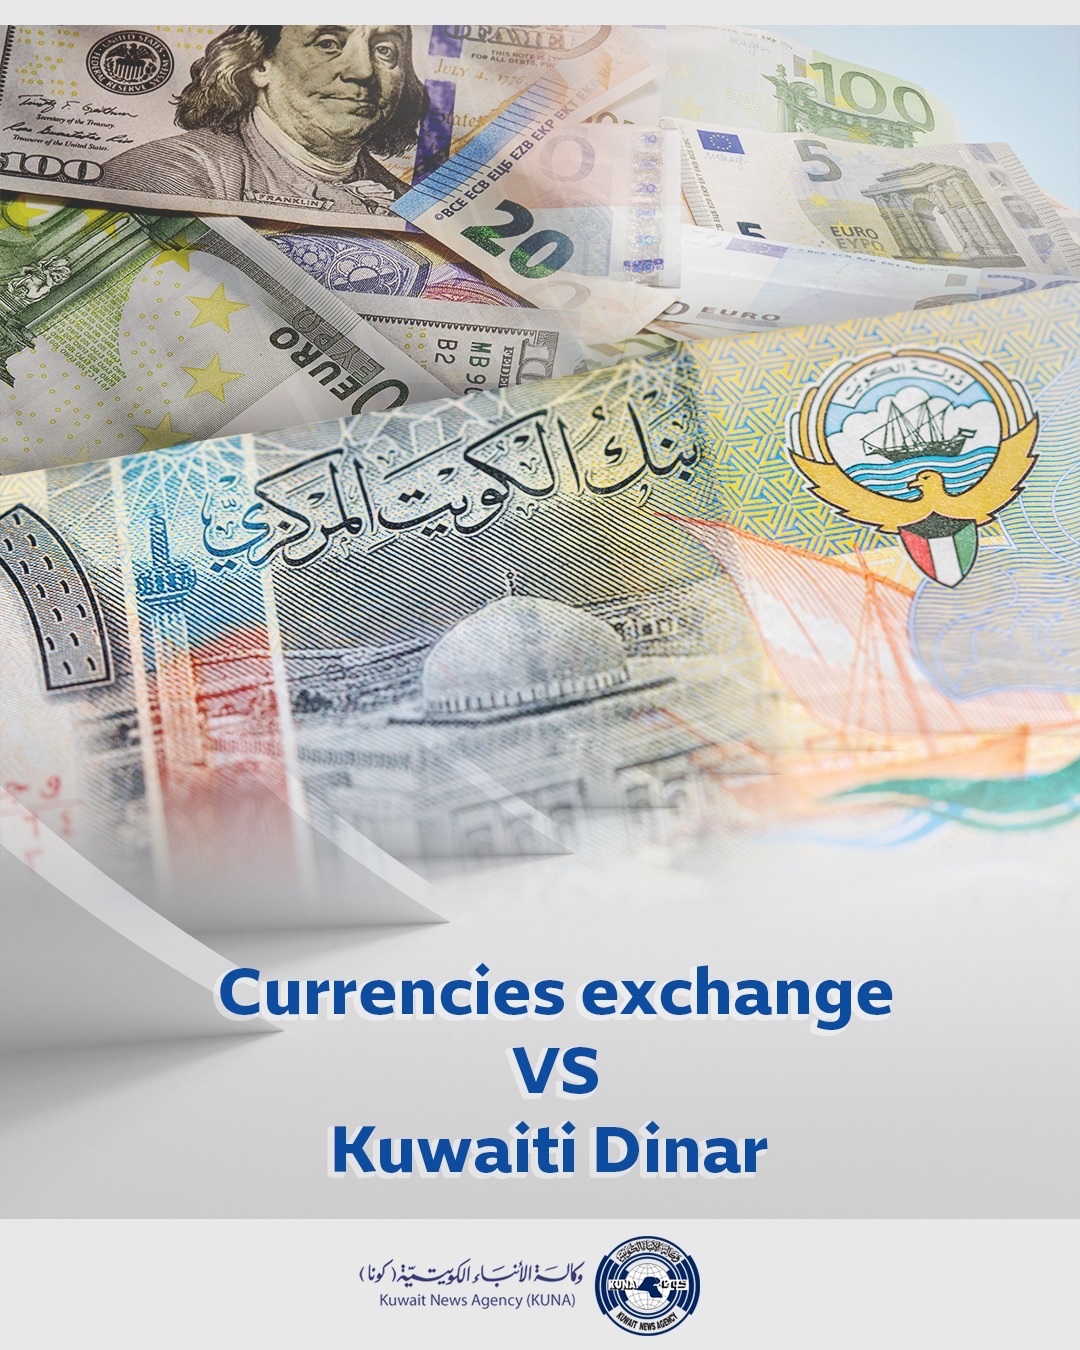 USD stabilizes at KD 0.308, Euro up to KD 0.337                                                                                                                                                                                                           